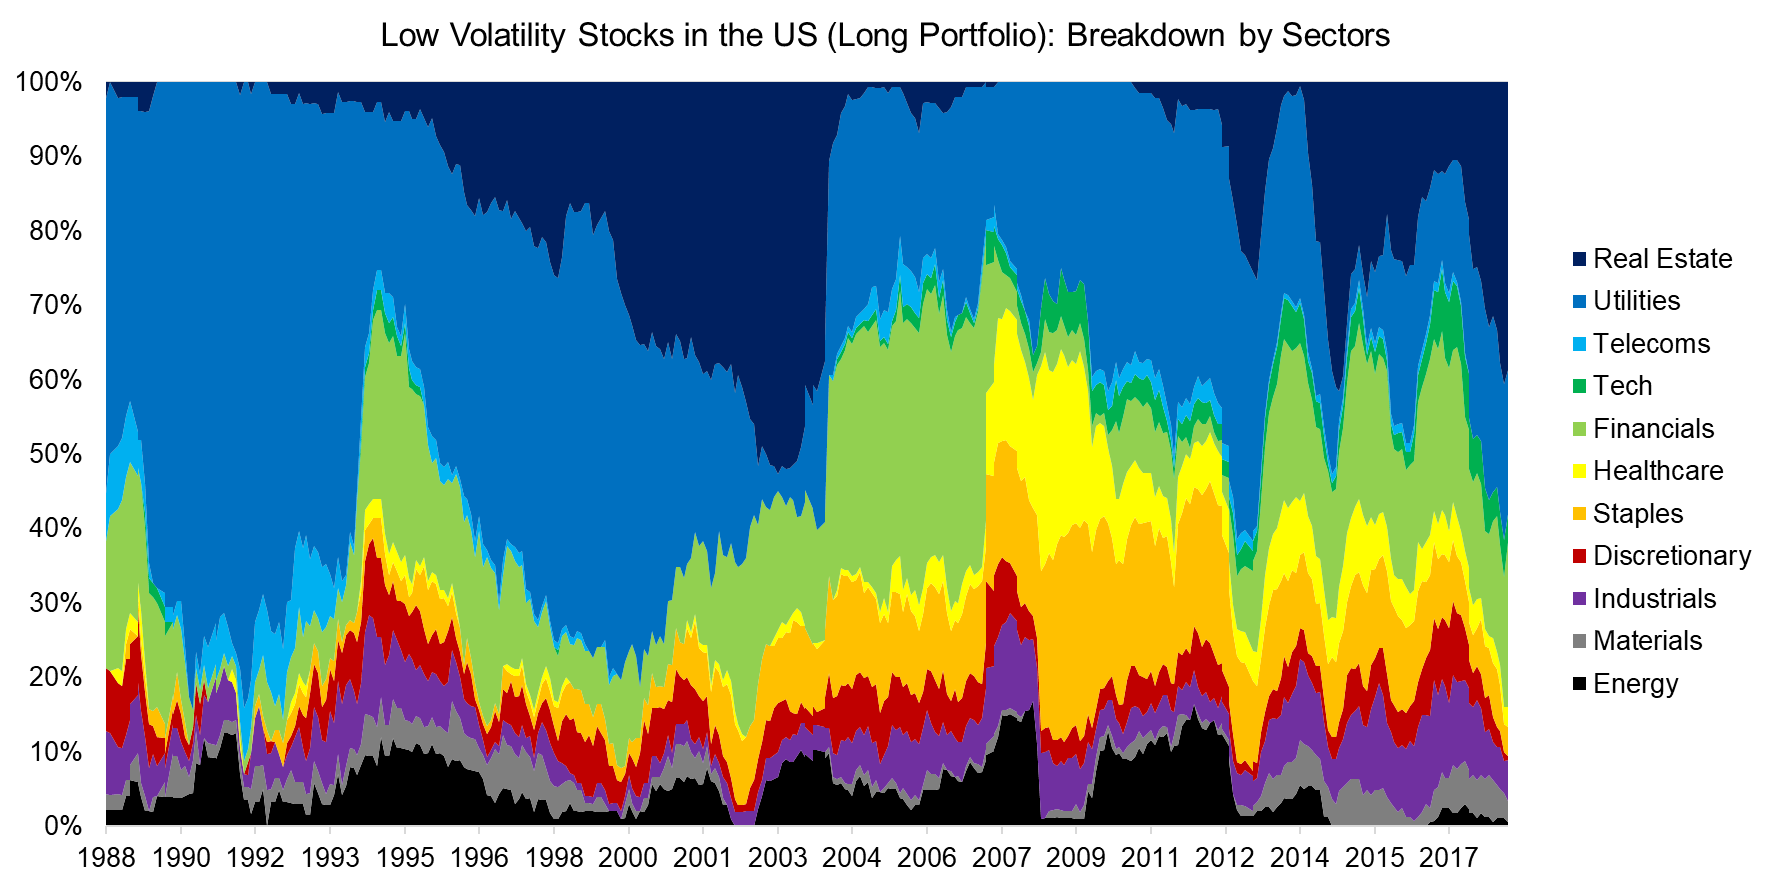 Low Volatility Stocks in the US (Long Portfolio) Breakdown by Sectors